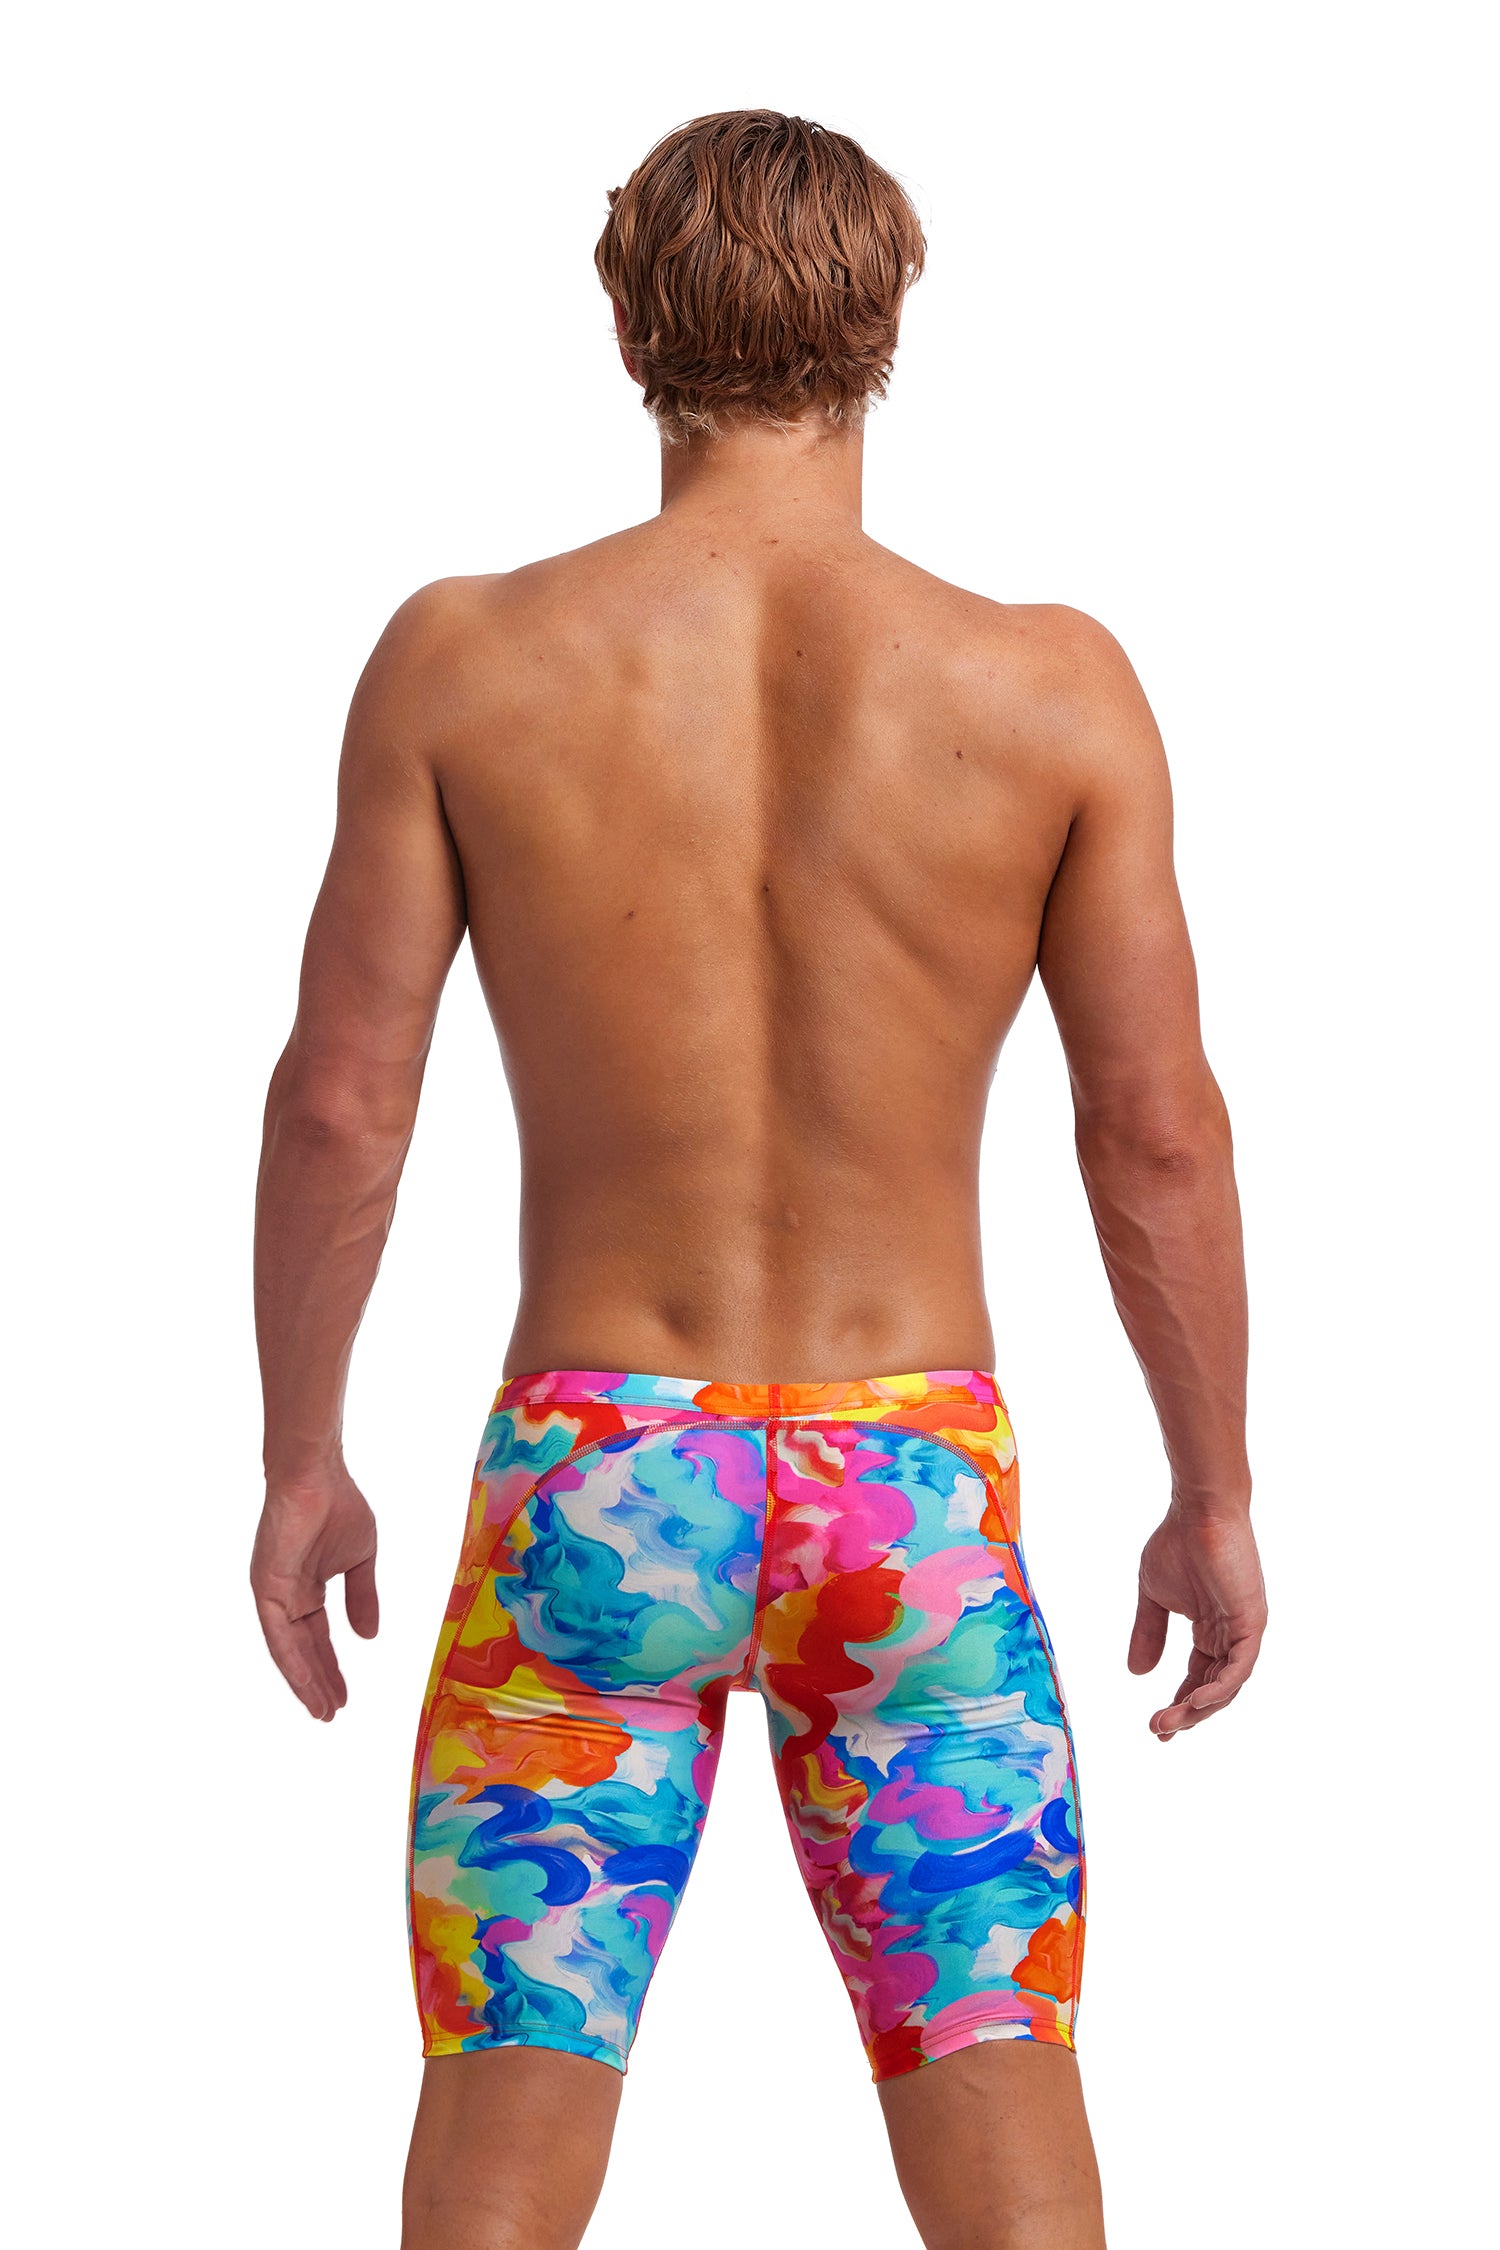 Way Funky Mother Funky Funky Trunks Men's Training Jammers Messed Up Swim Trunks Mens